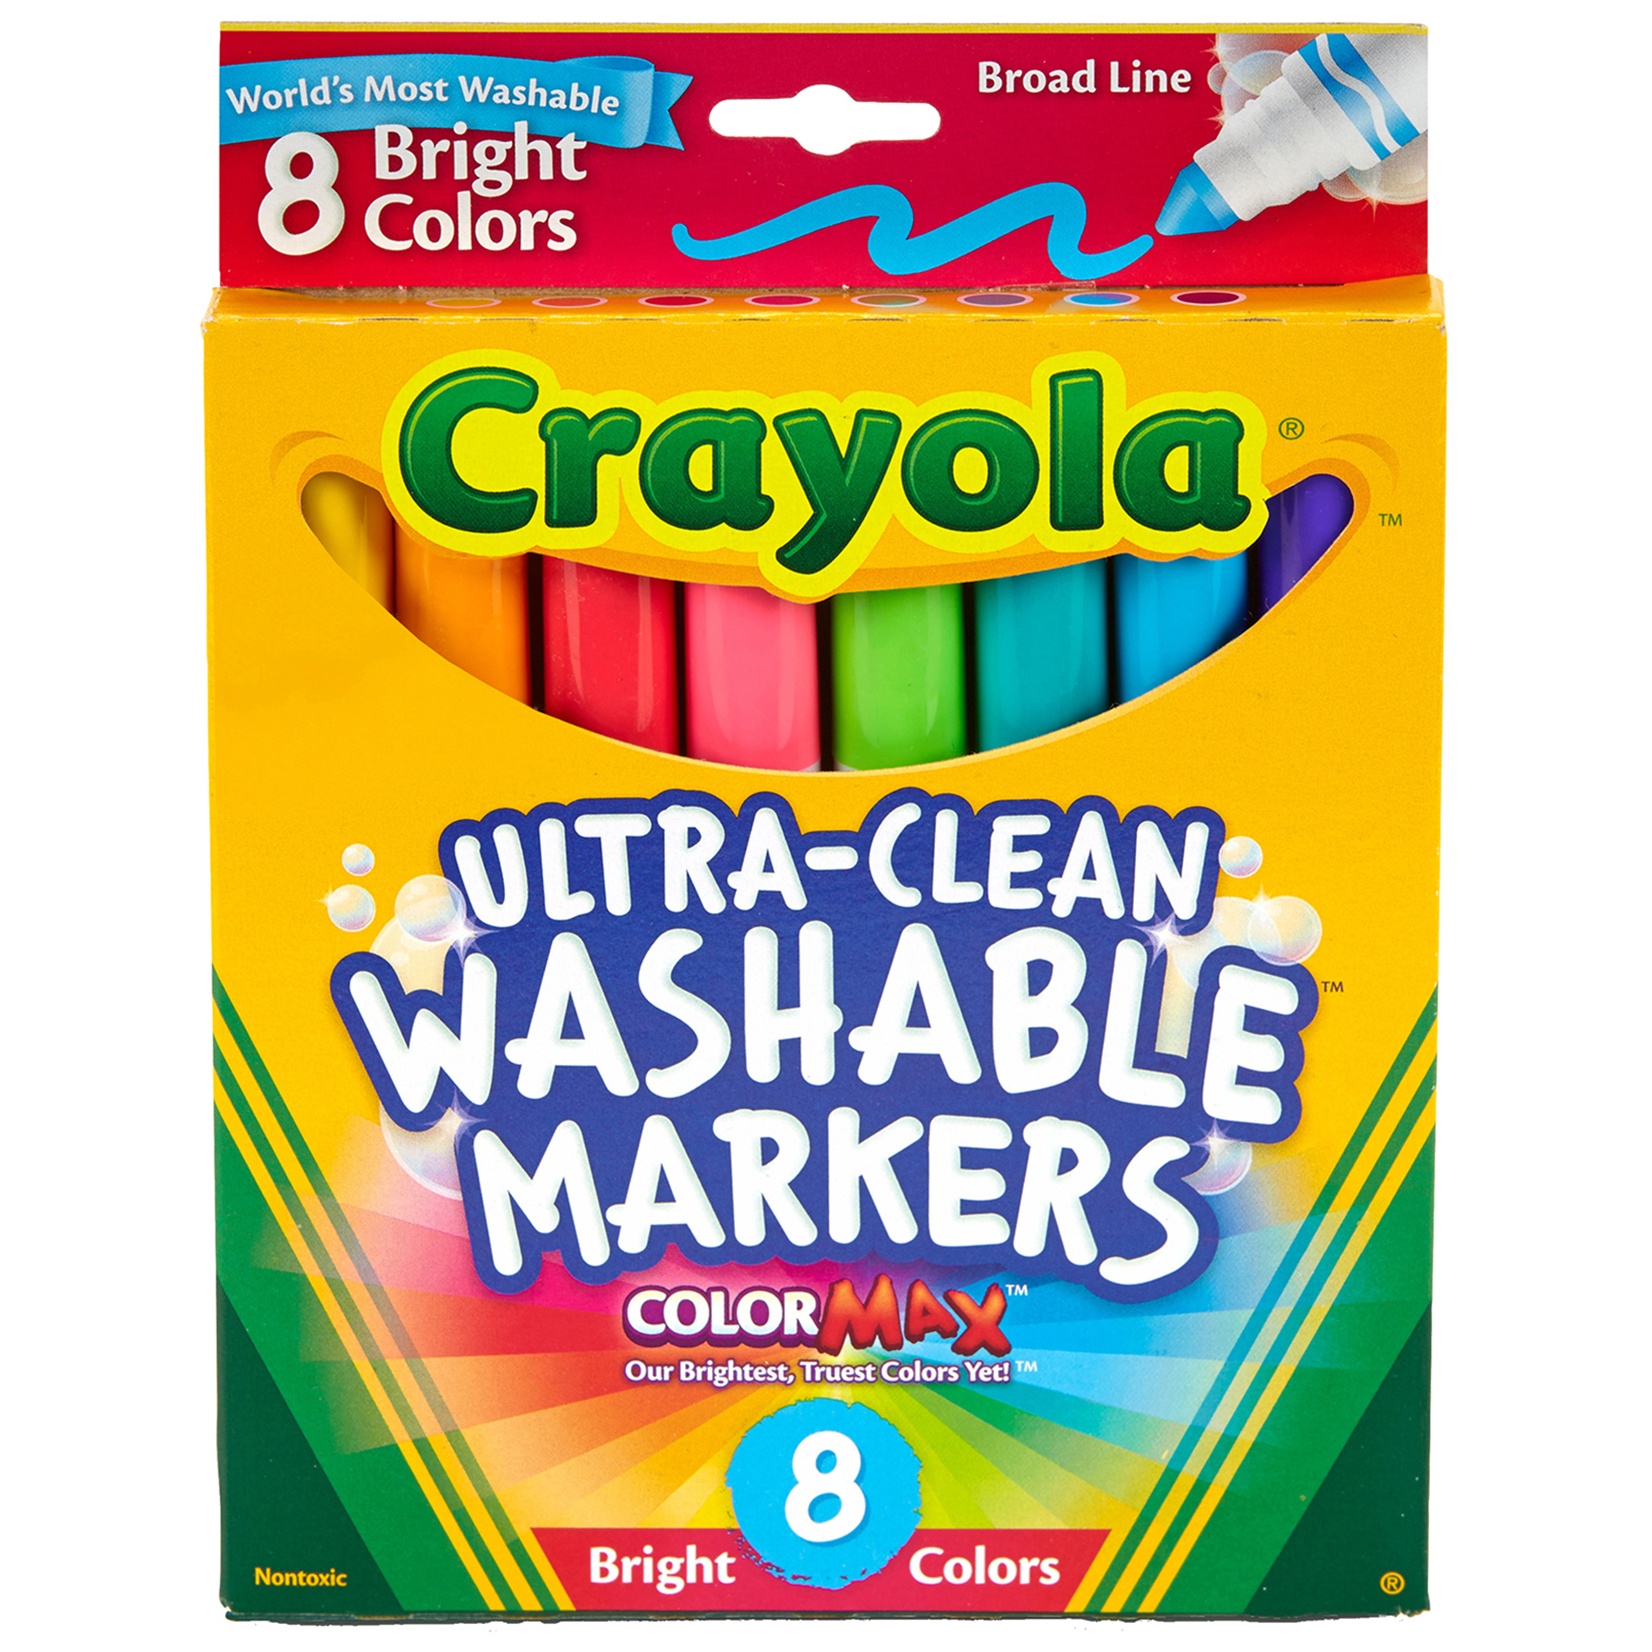 Crayola UltraClean Color Max Broad Line Washable MarkersBright Colors